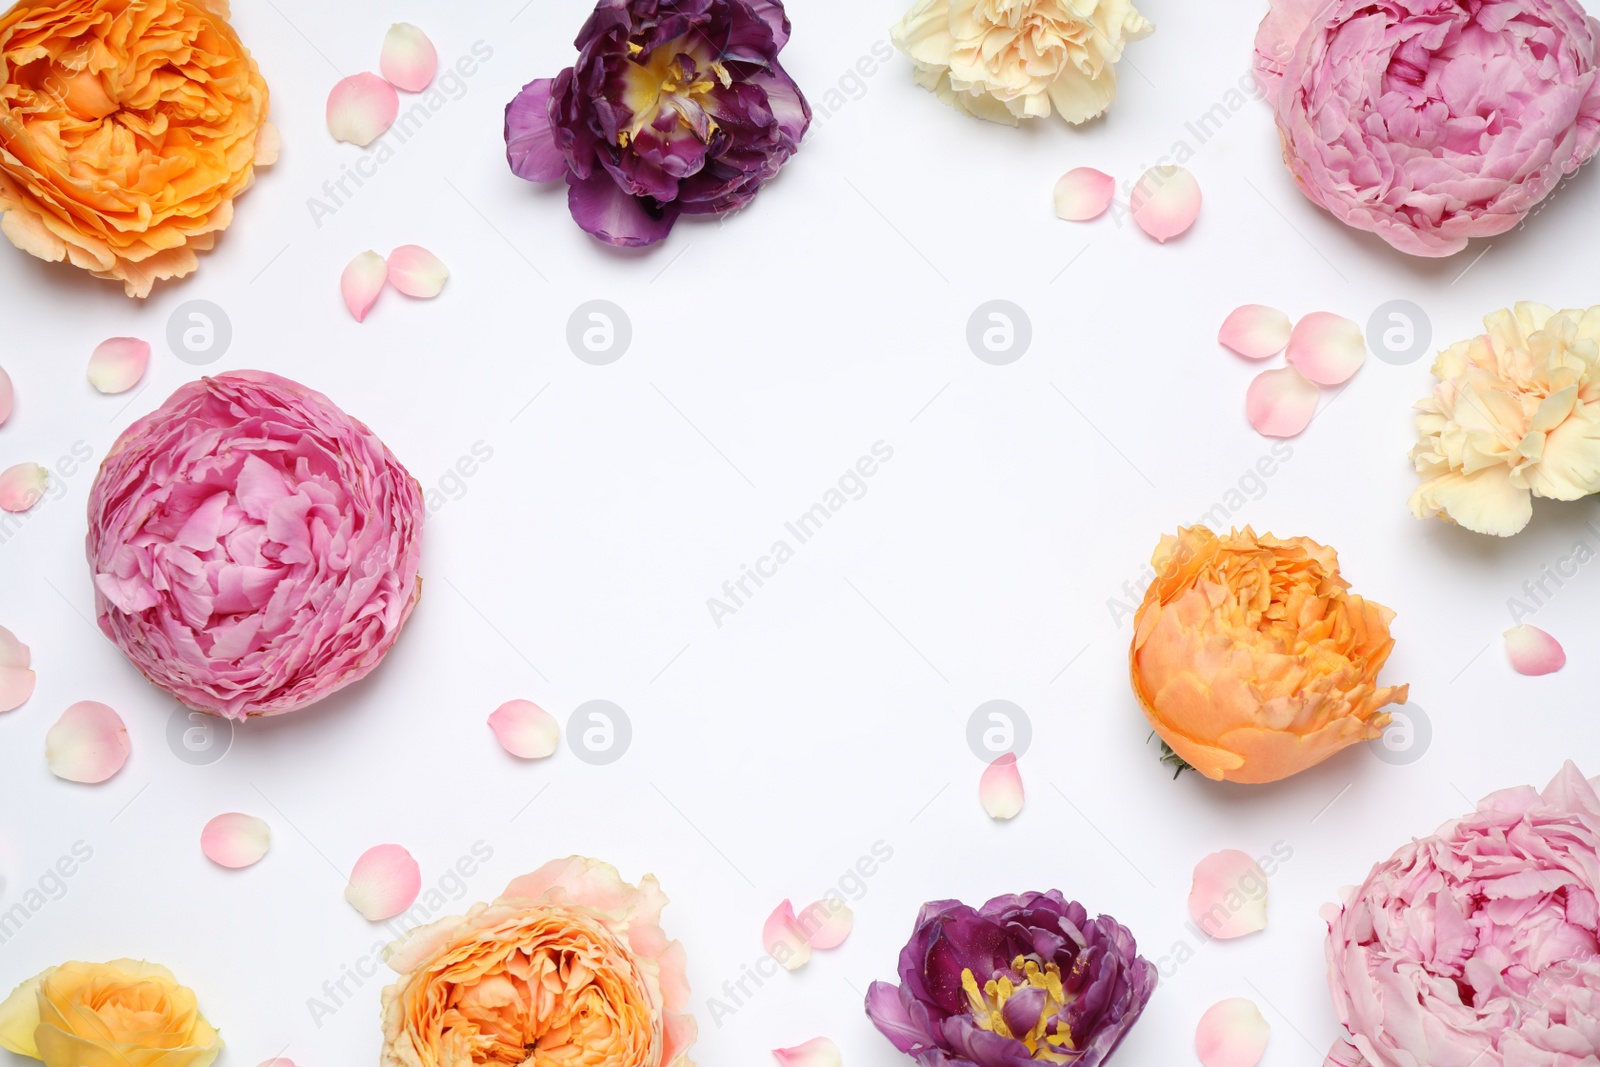 Photo of Frame made of beautiful flowers on white background, flat lay with space for text. Floral composition